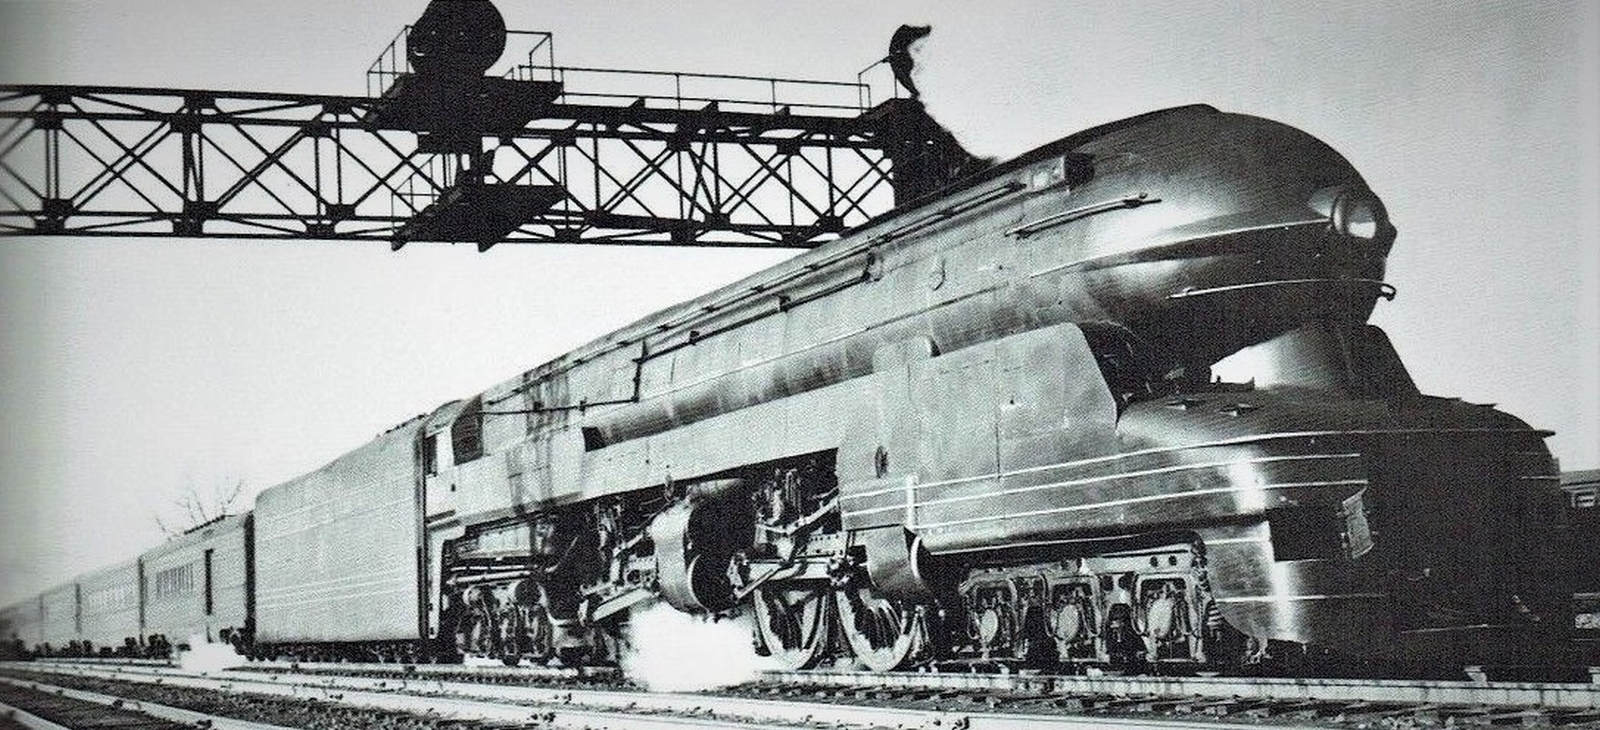 S1 in November 1942 with the “Trail Blazer” from New York to Chicago